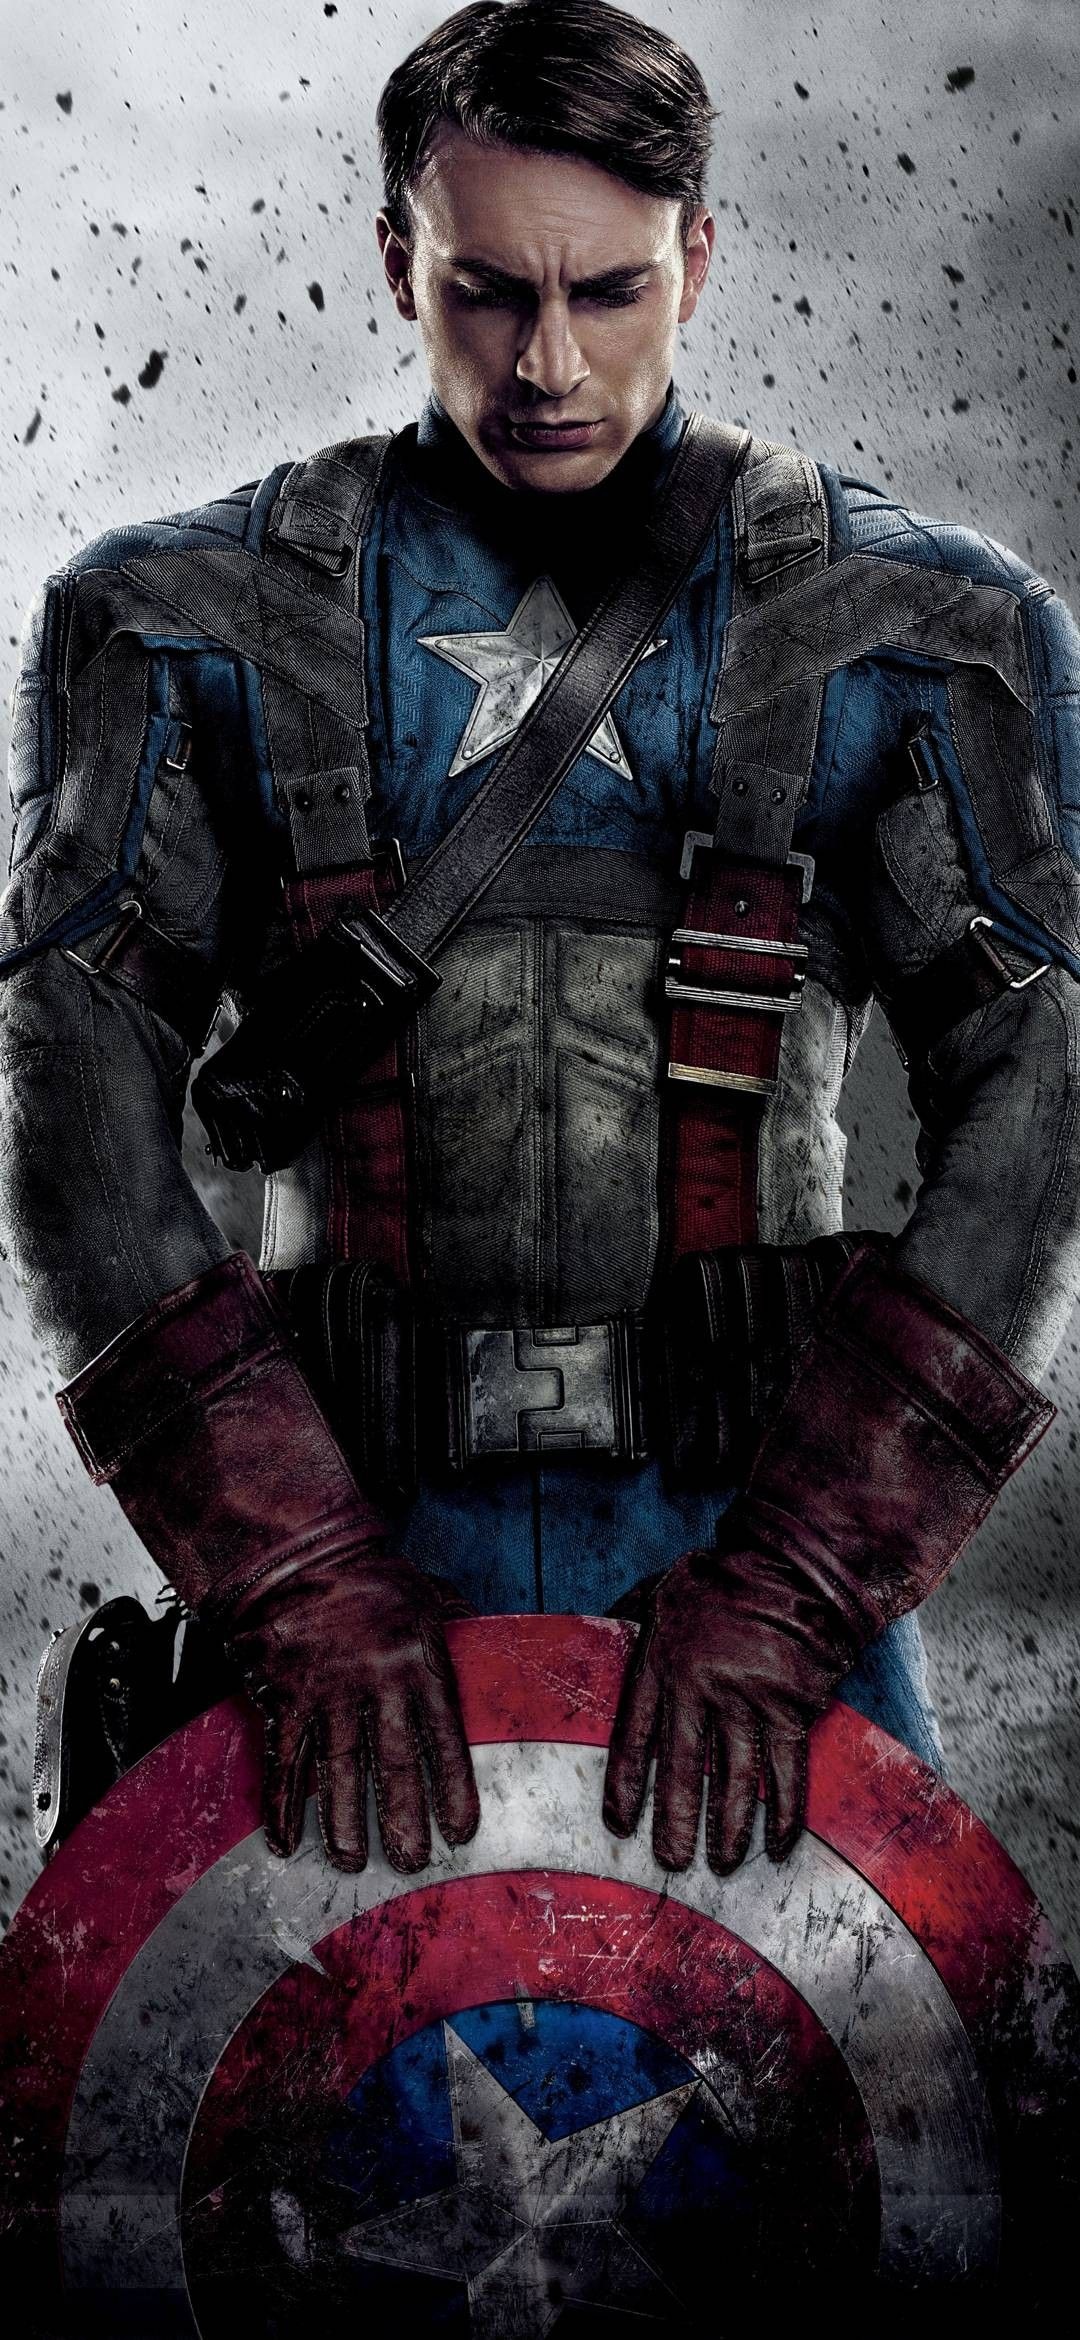 Captain America: Led the team of Howling Commandos in many operations against HYDRA. 1080x2340 HD Background.